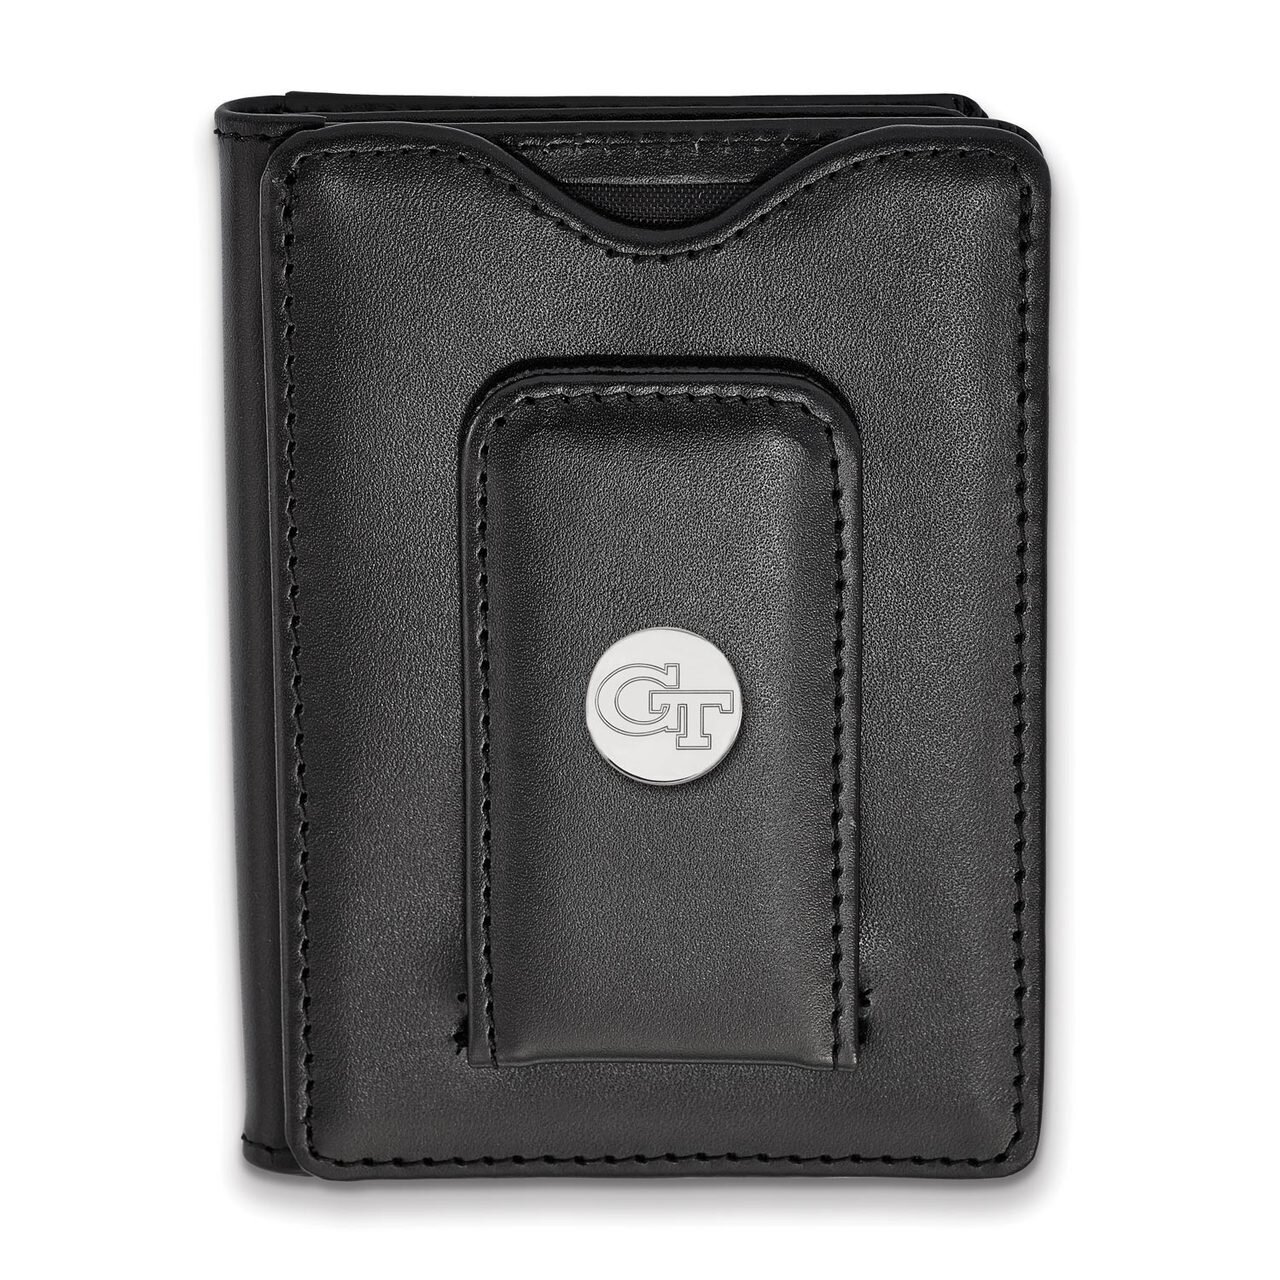 Georgia Institute of Technology Black Leather Wallet SS065GT-W1